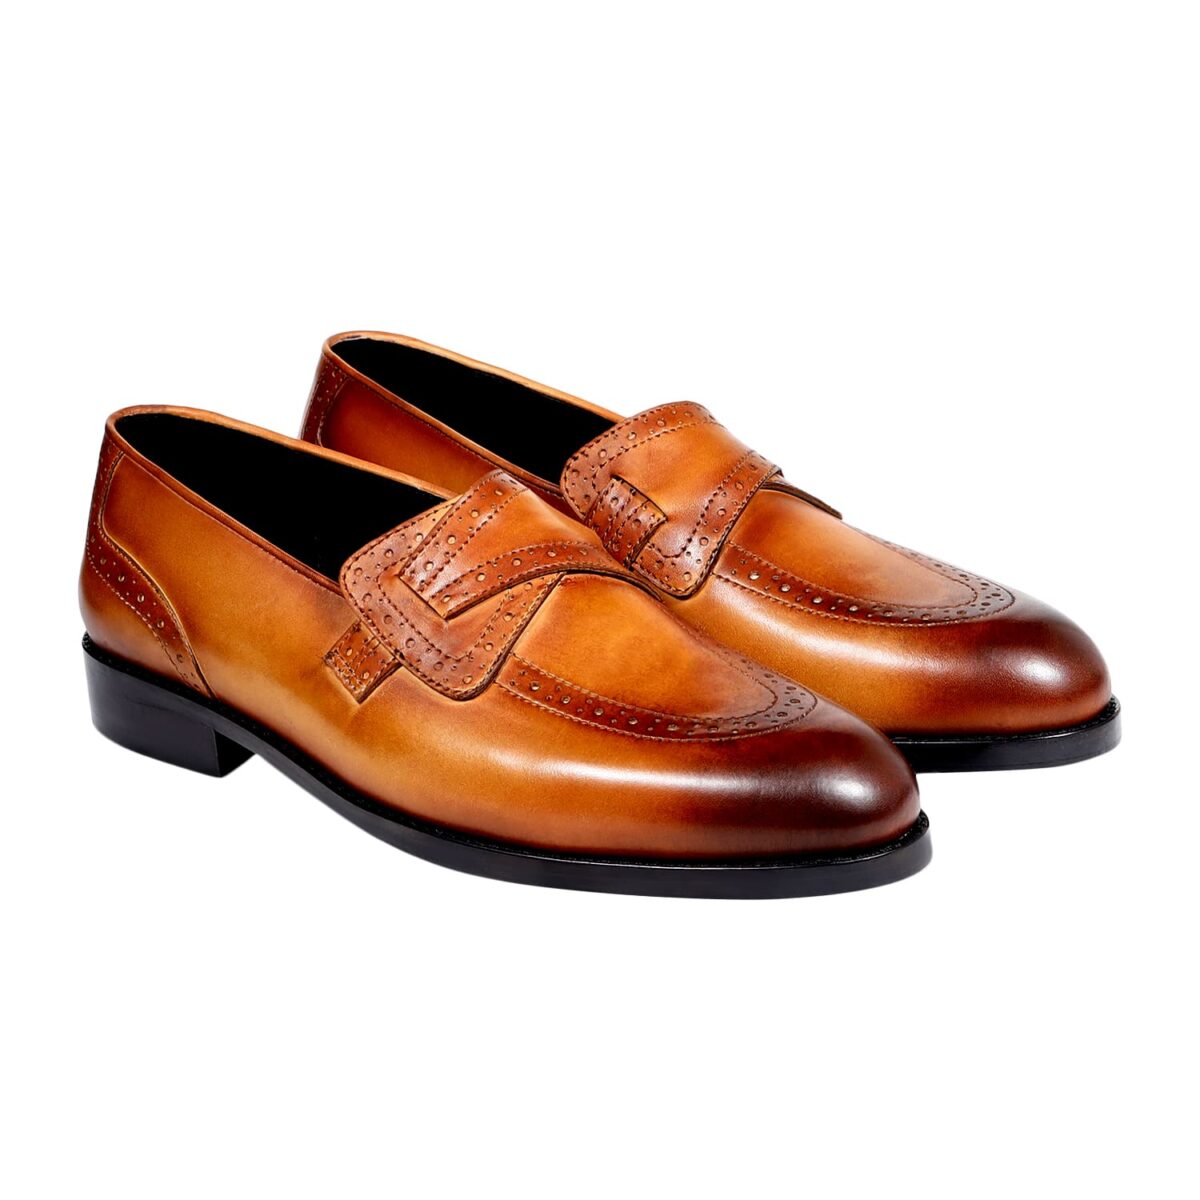 SAMI LOAFERS T